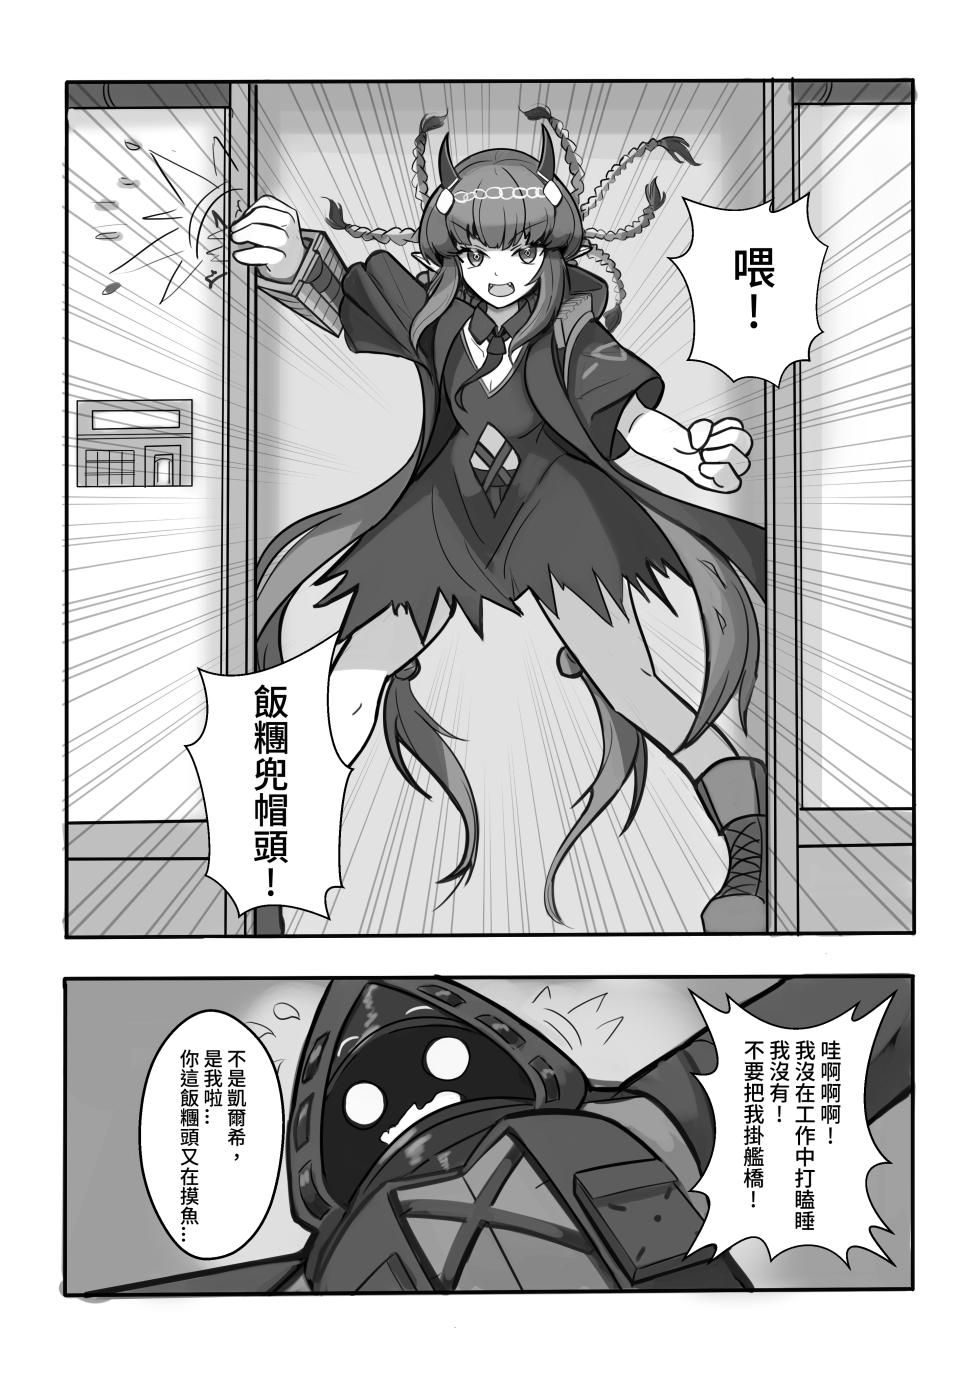 Afterglow-夕照之後 (Arknights) - Page 5